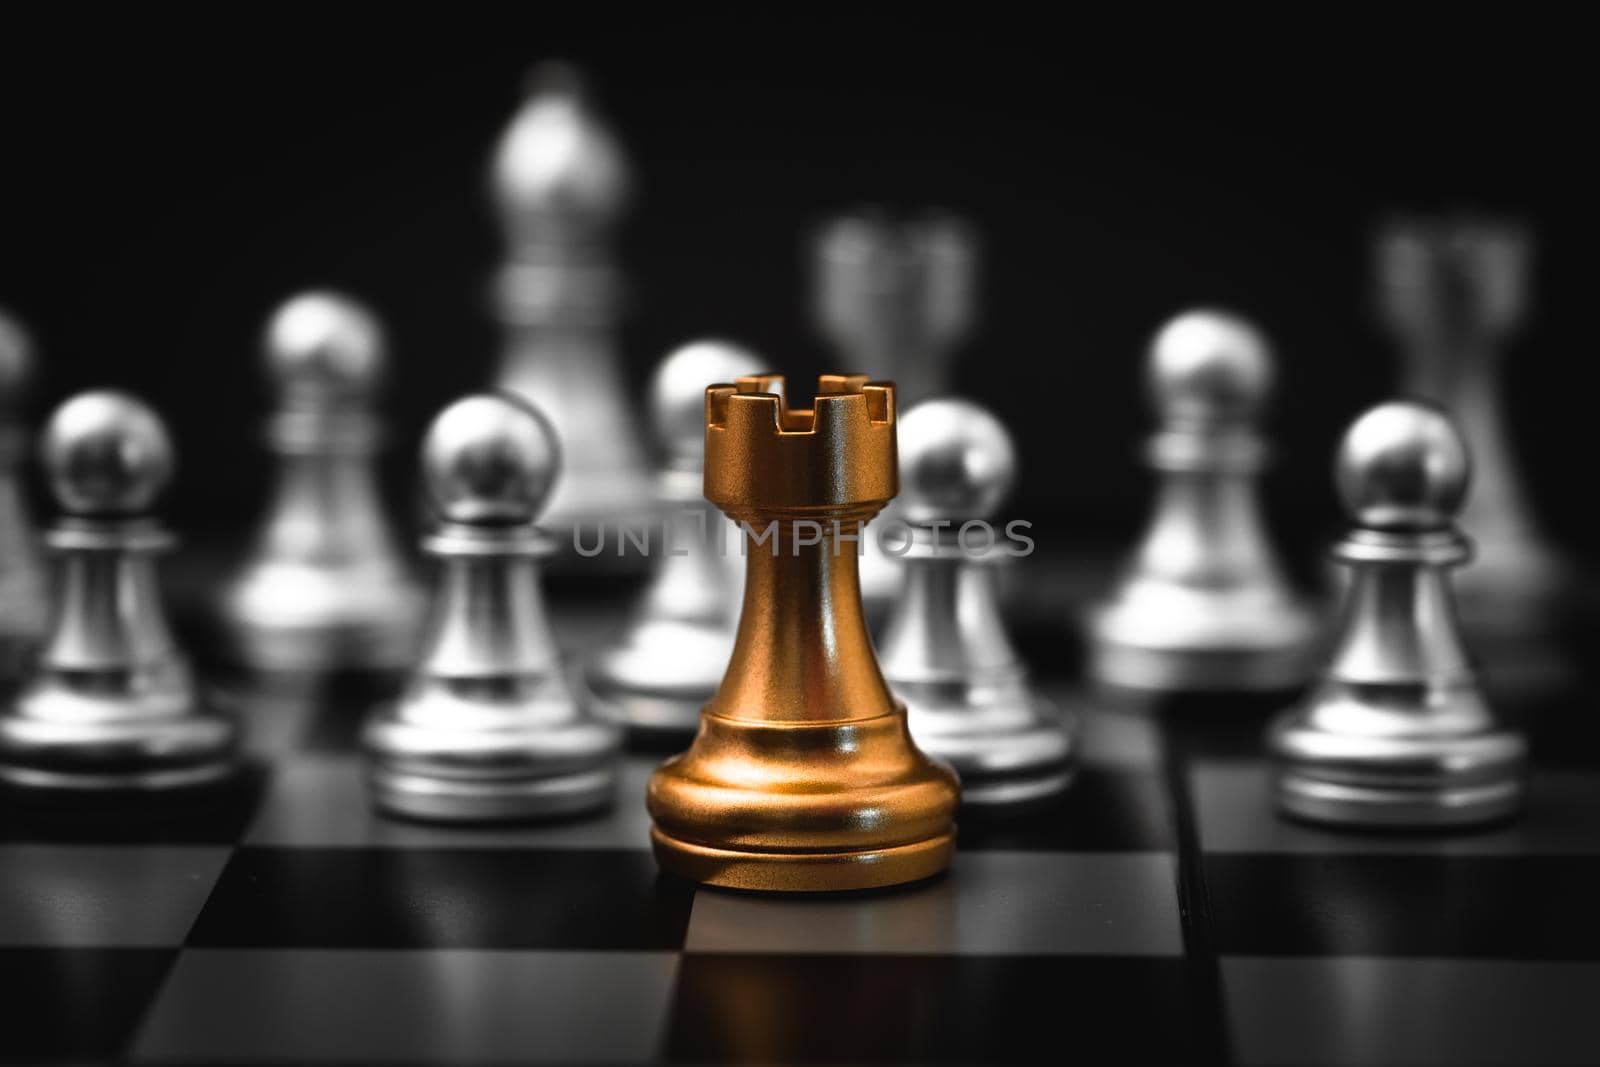 Gold Rook or Castle Tower Chess piece closeup on chess board game. Elite Company leader concept. by qualitystocks